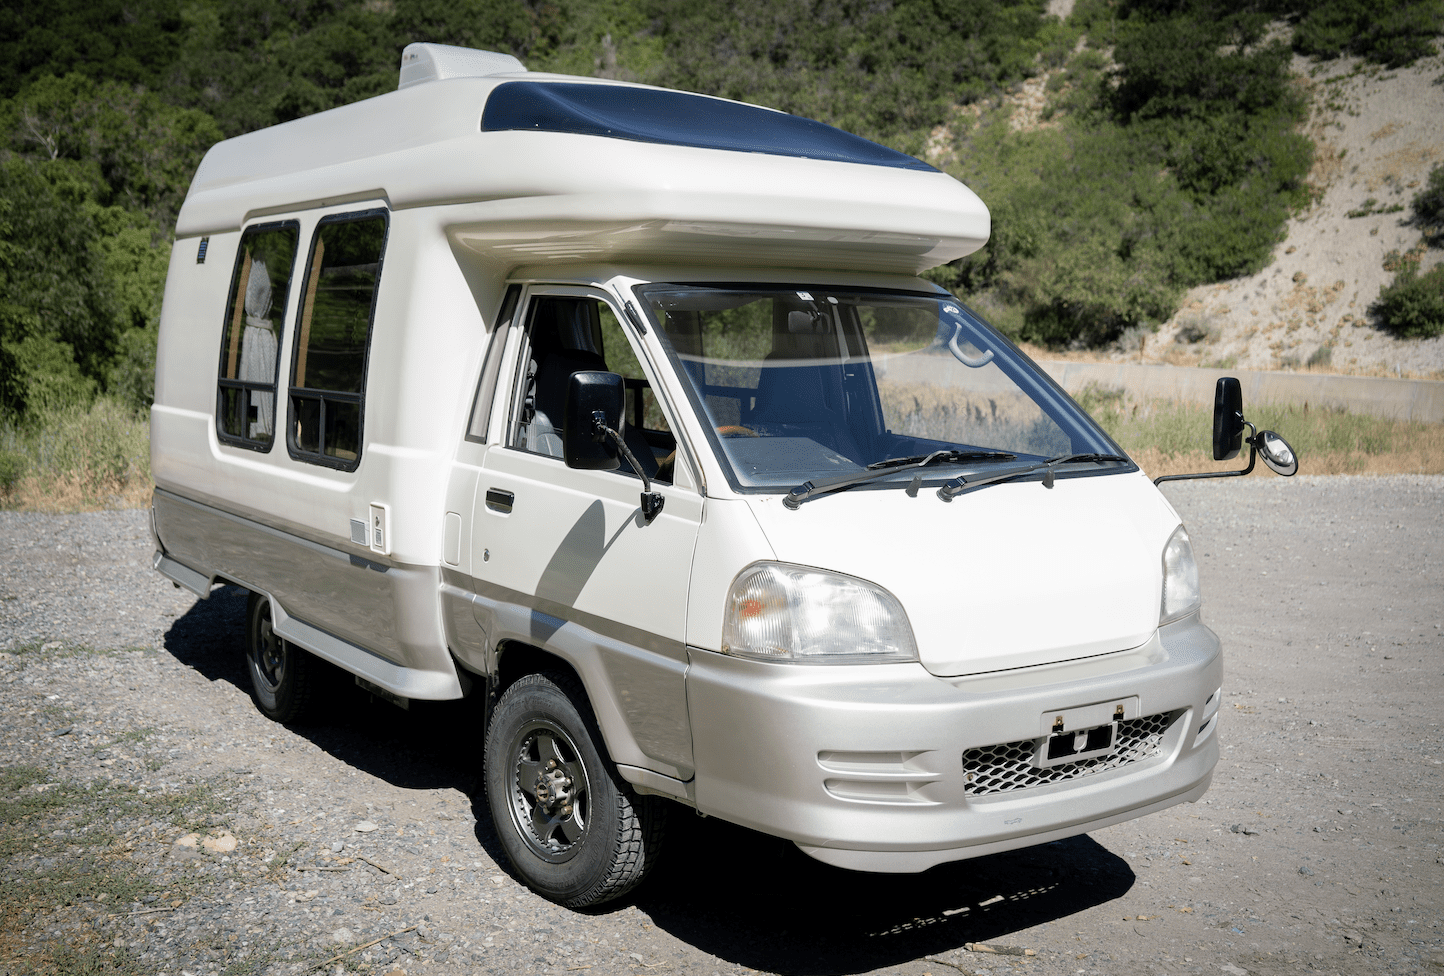 Buy this uber-rad Toyota Townace camper 